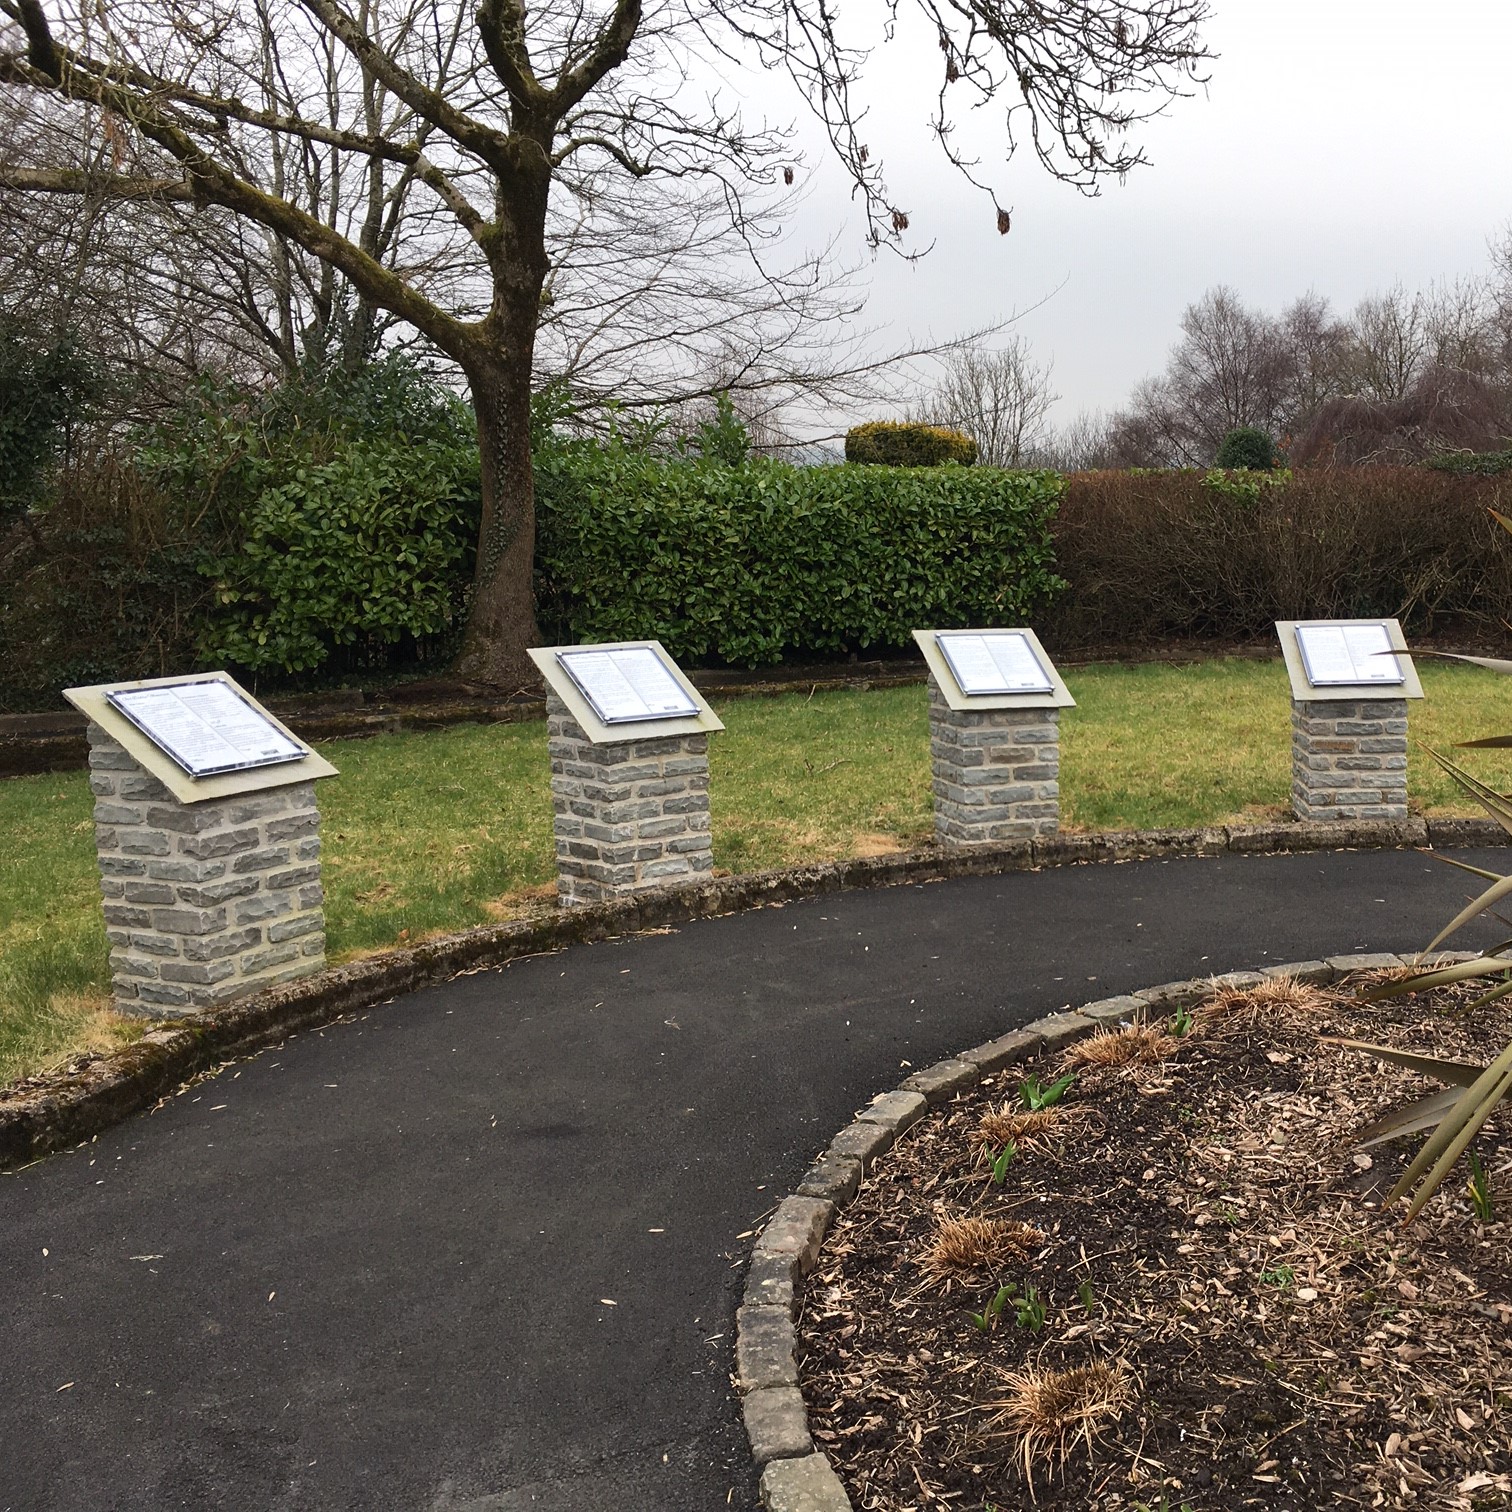 Five memory plaques on display in the memory garden, 4 seen here